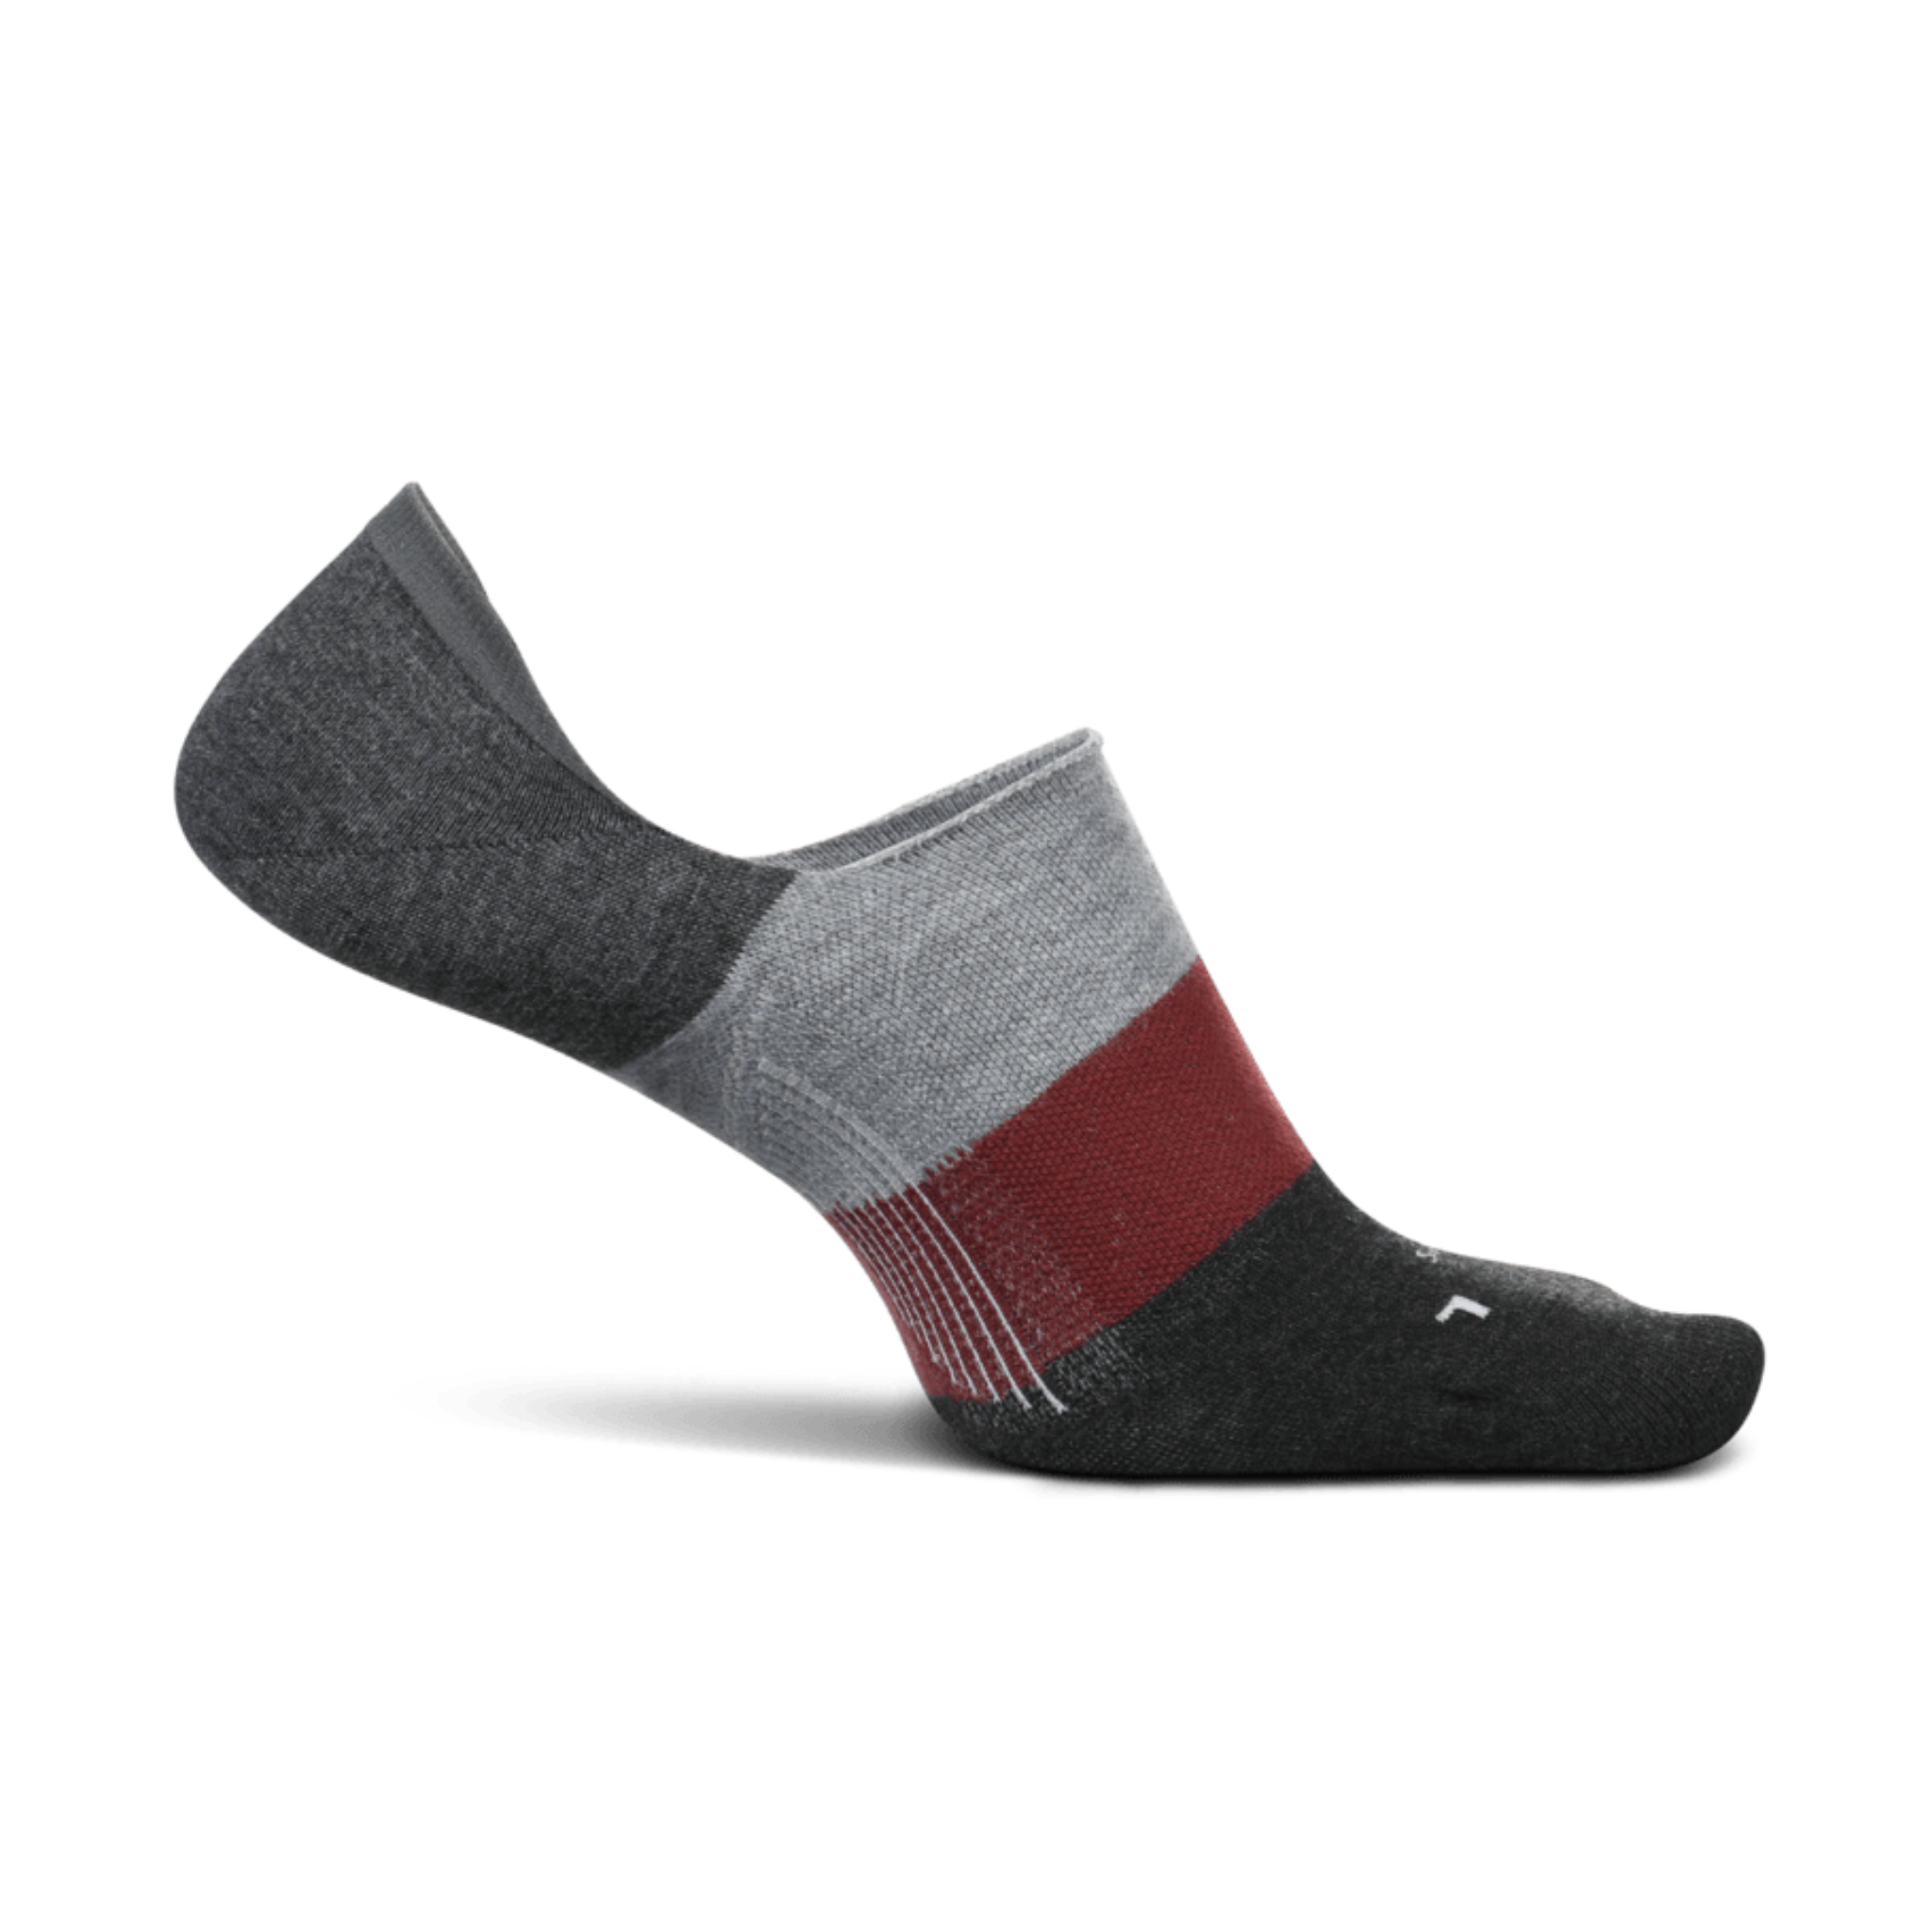 FEETURES MEN'S EVERYDAY NO SHOW COLORBLOCK CLEARANCE GREY